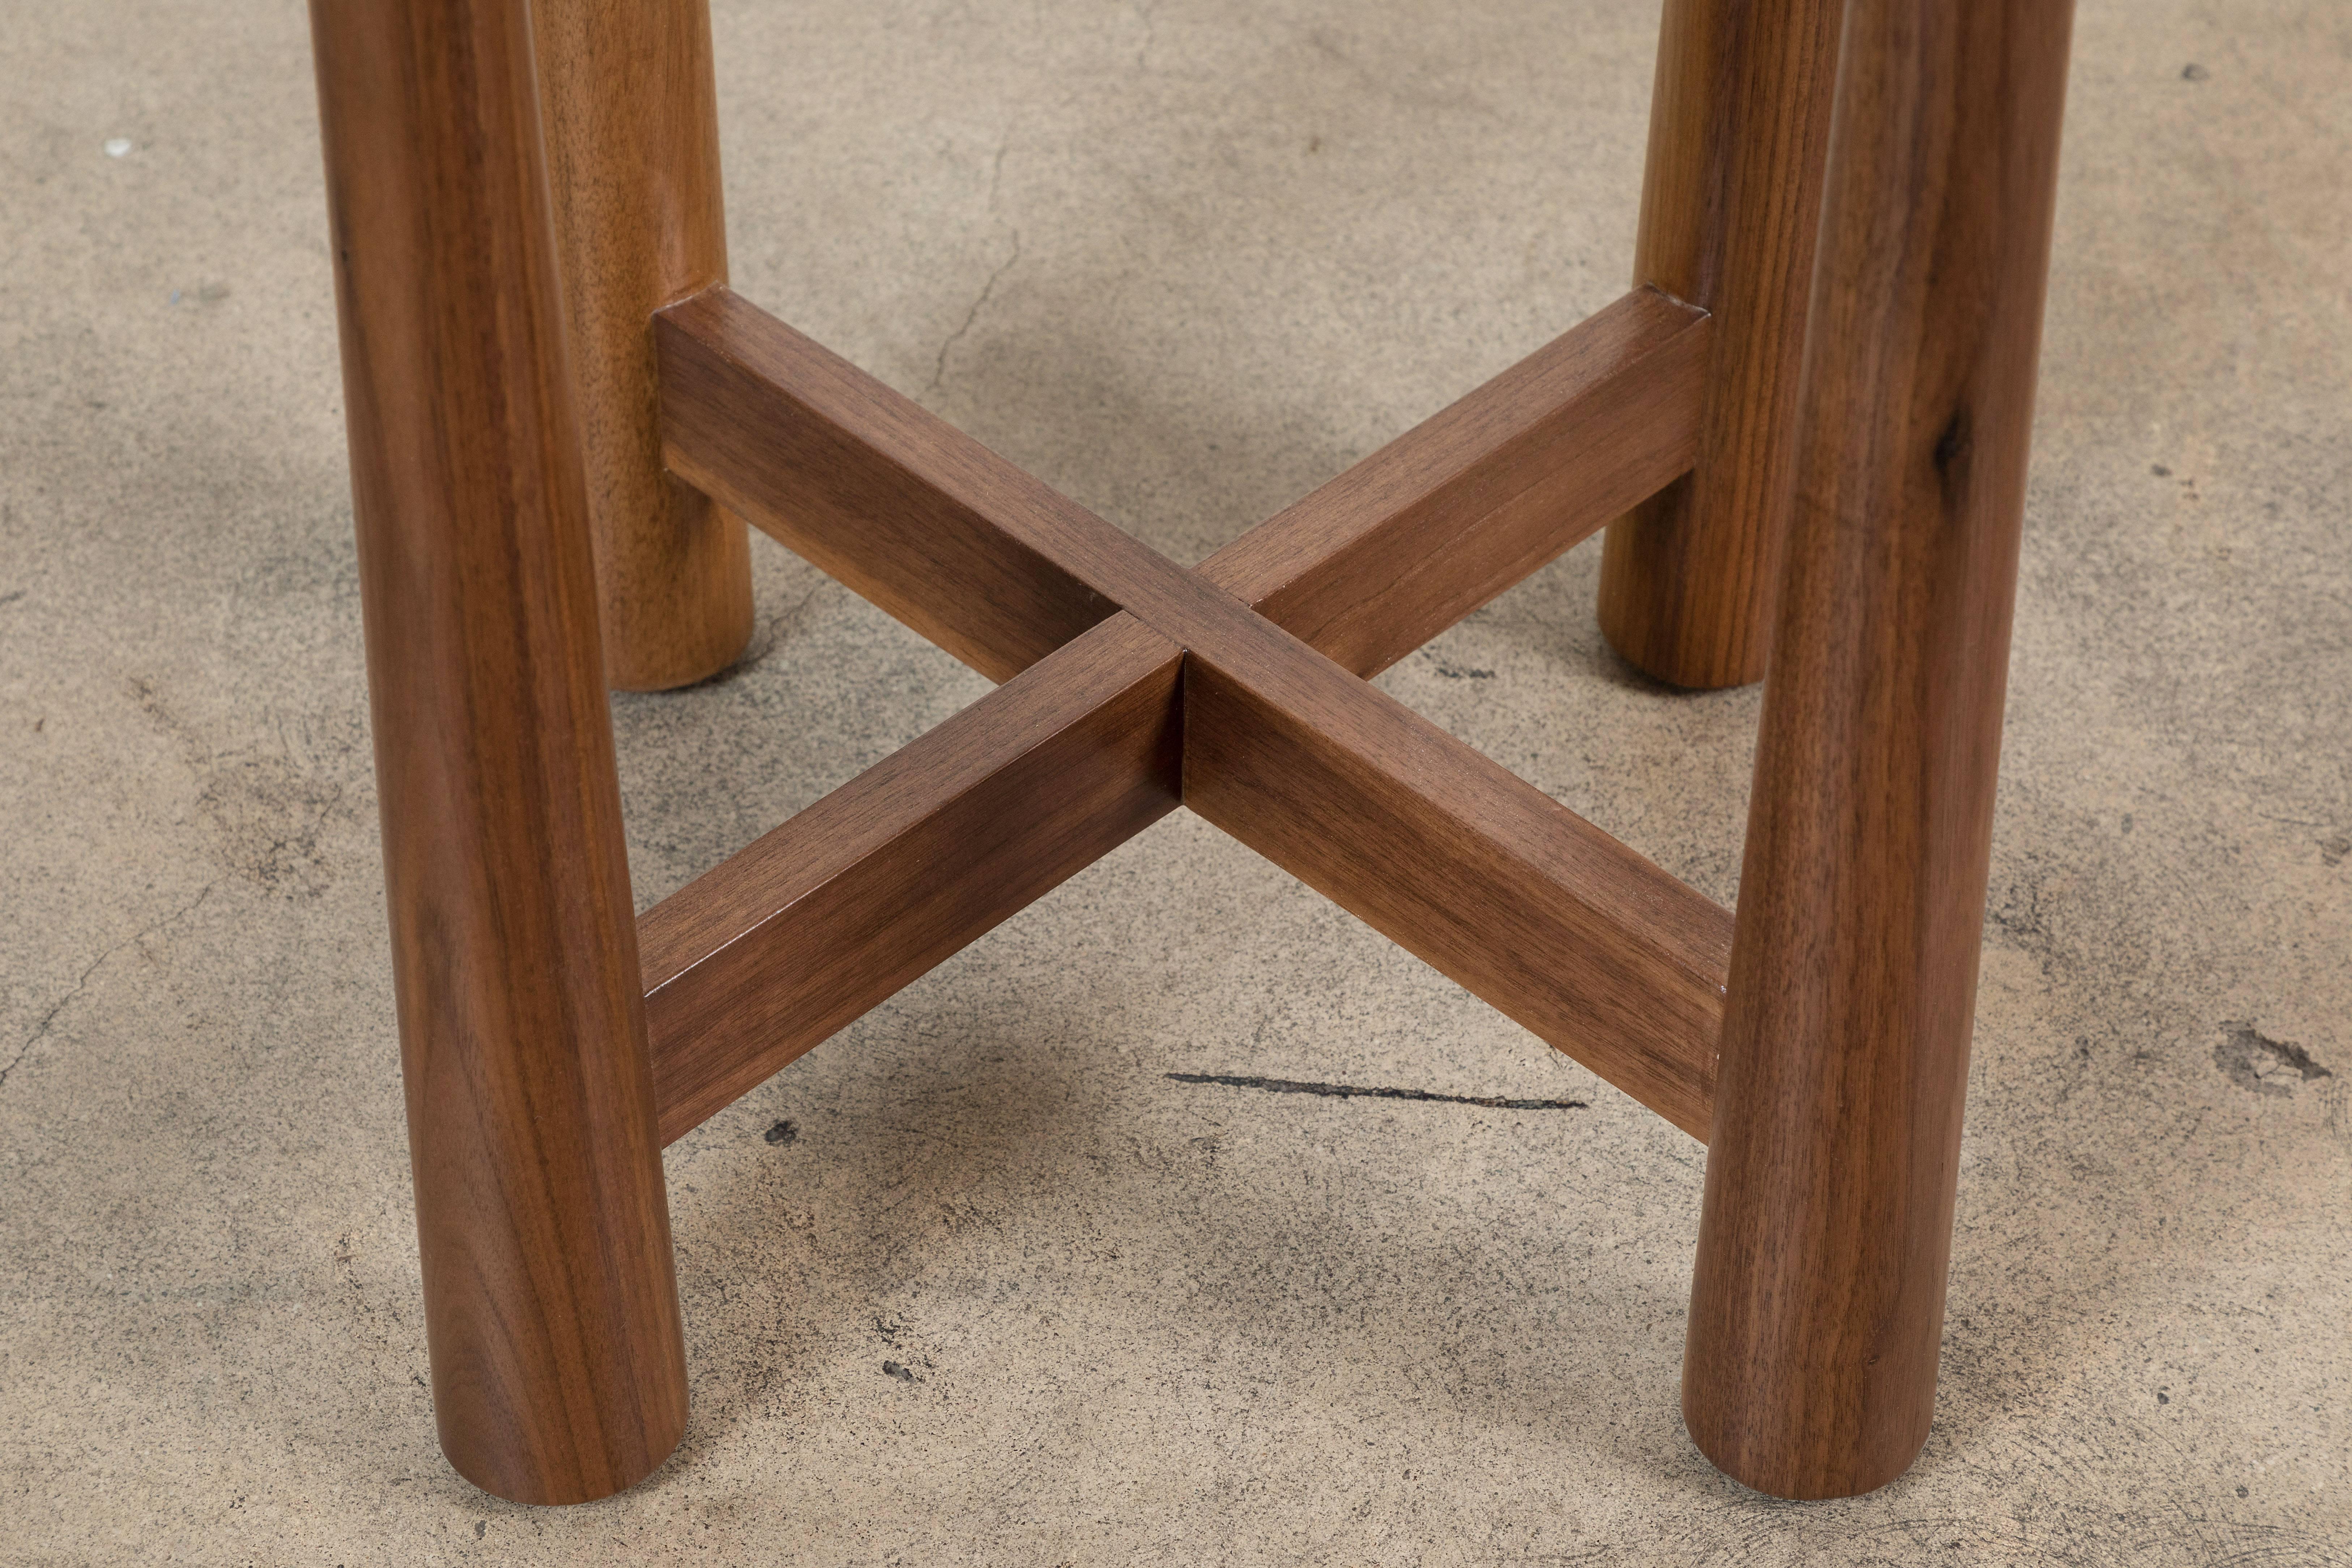 Turned Travertine and Walnut Bronson Drinks Table by Lawson-Fenning